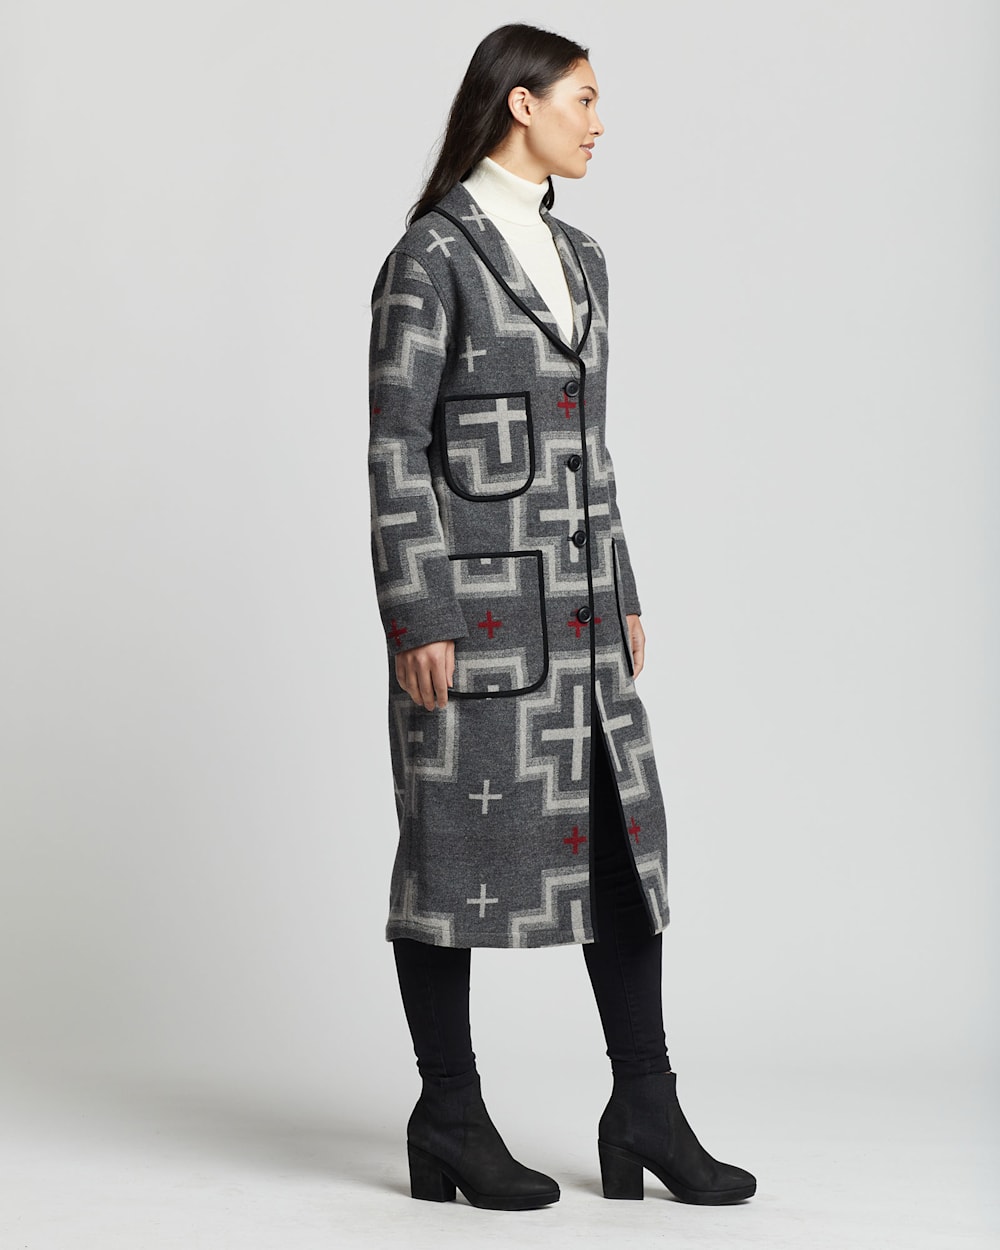 ALTERNATE VIEW OF WOMEN'S WOOL SHAWL-COLLAR DUSTER COAT IN GREY SAN MIGUEL image number 2